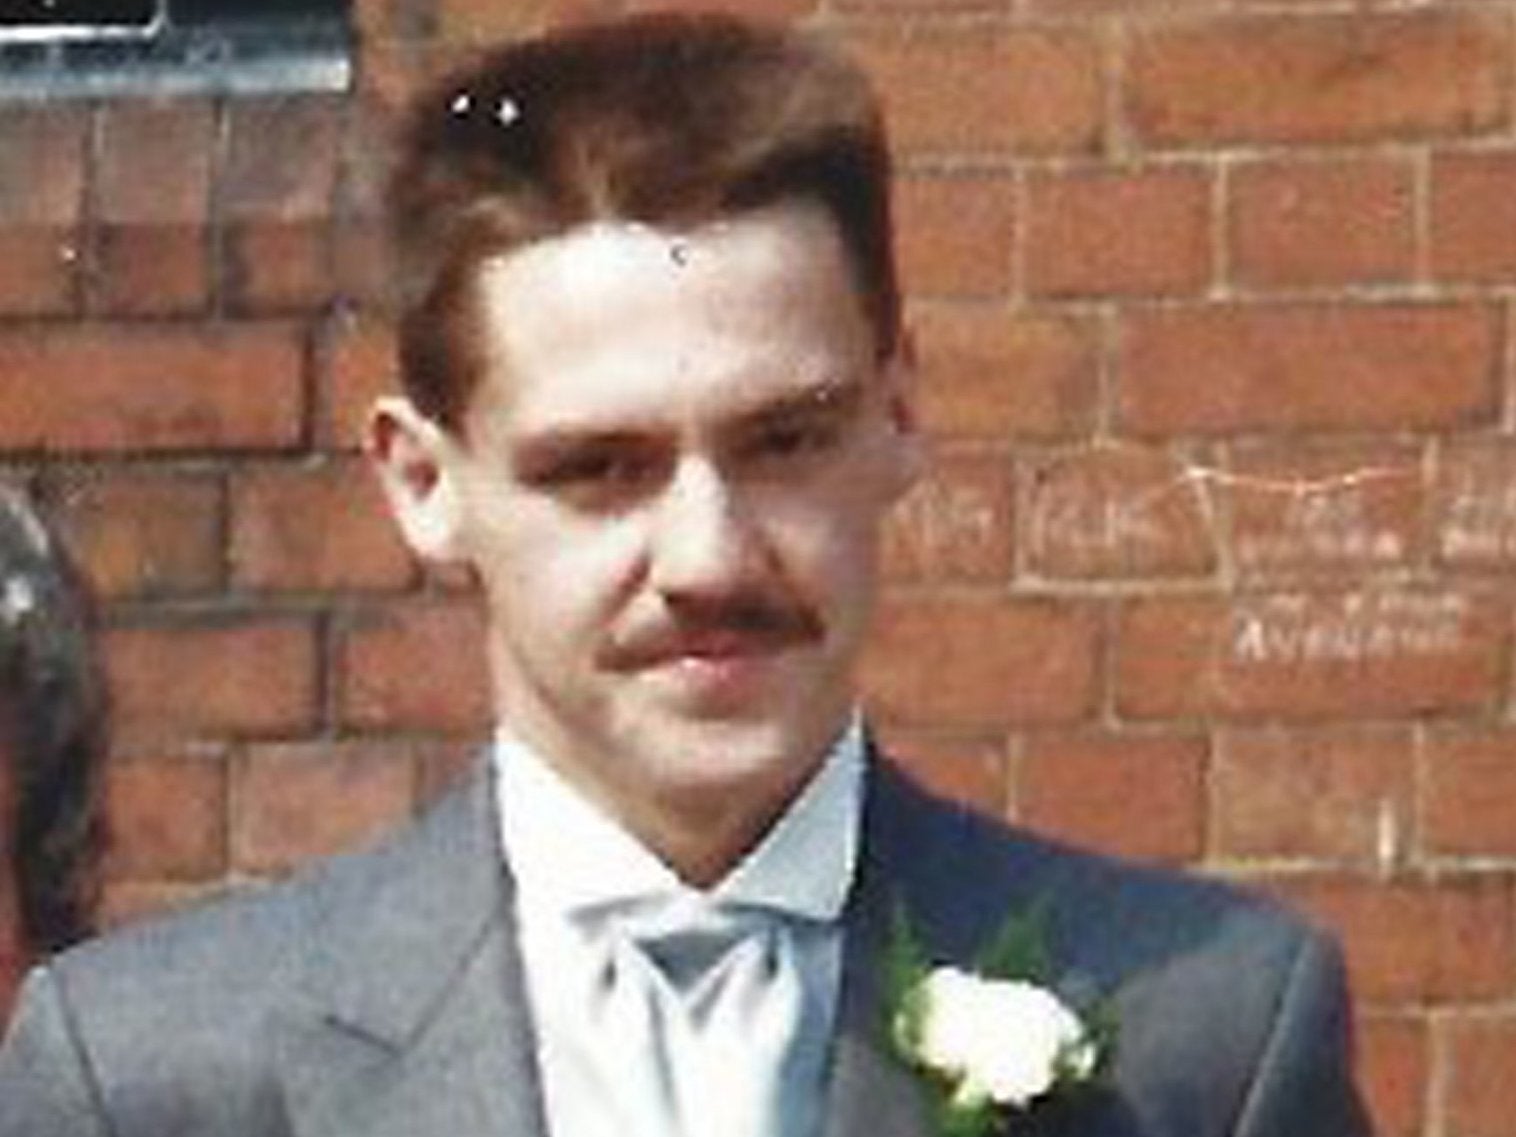 Richard Martindale, who had severe haemophilia, contracted HIV and died aged 23 in 1990.